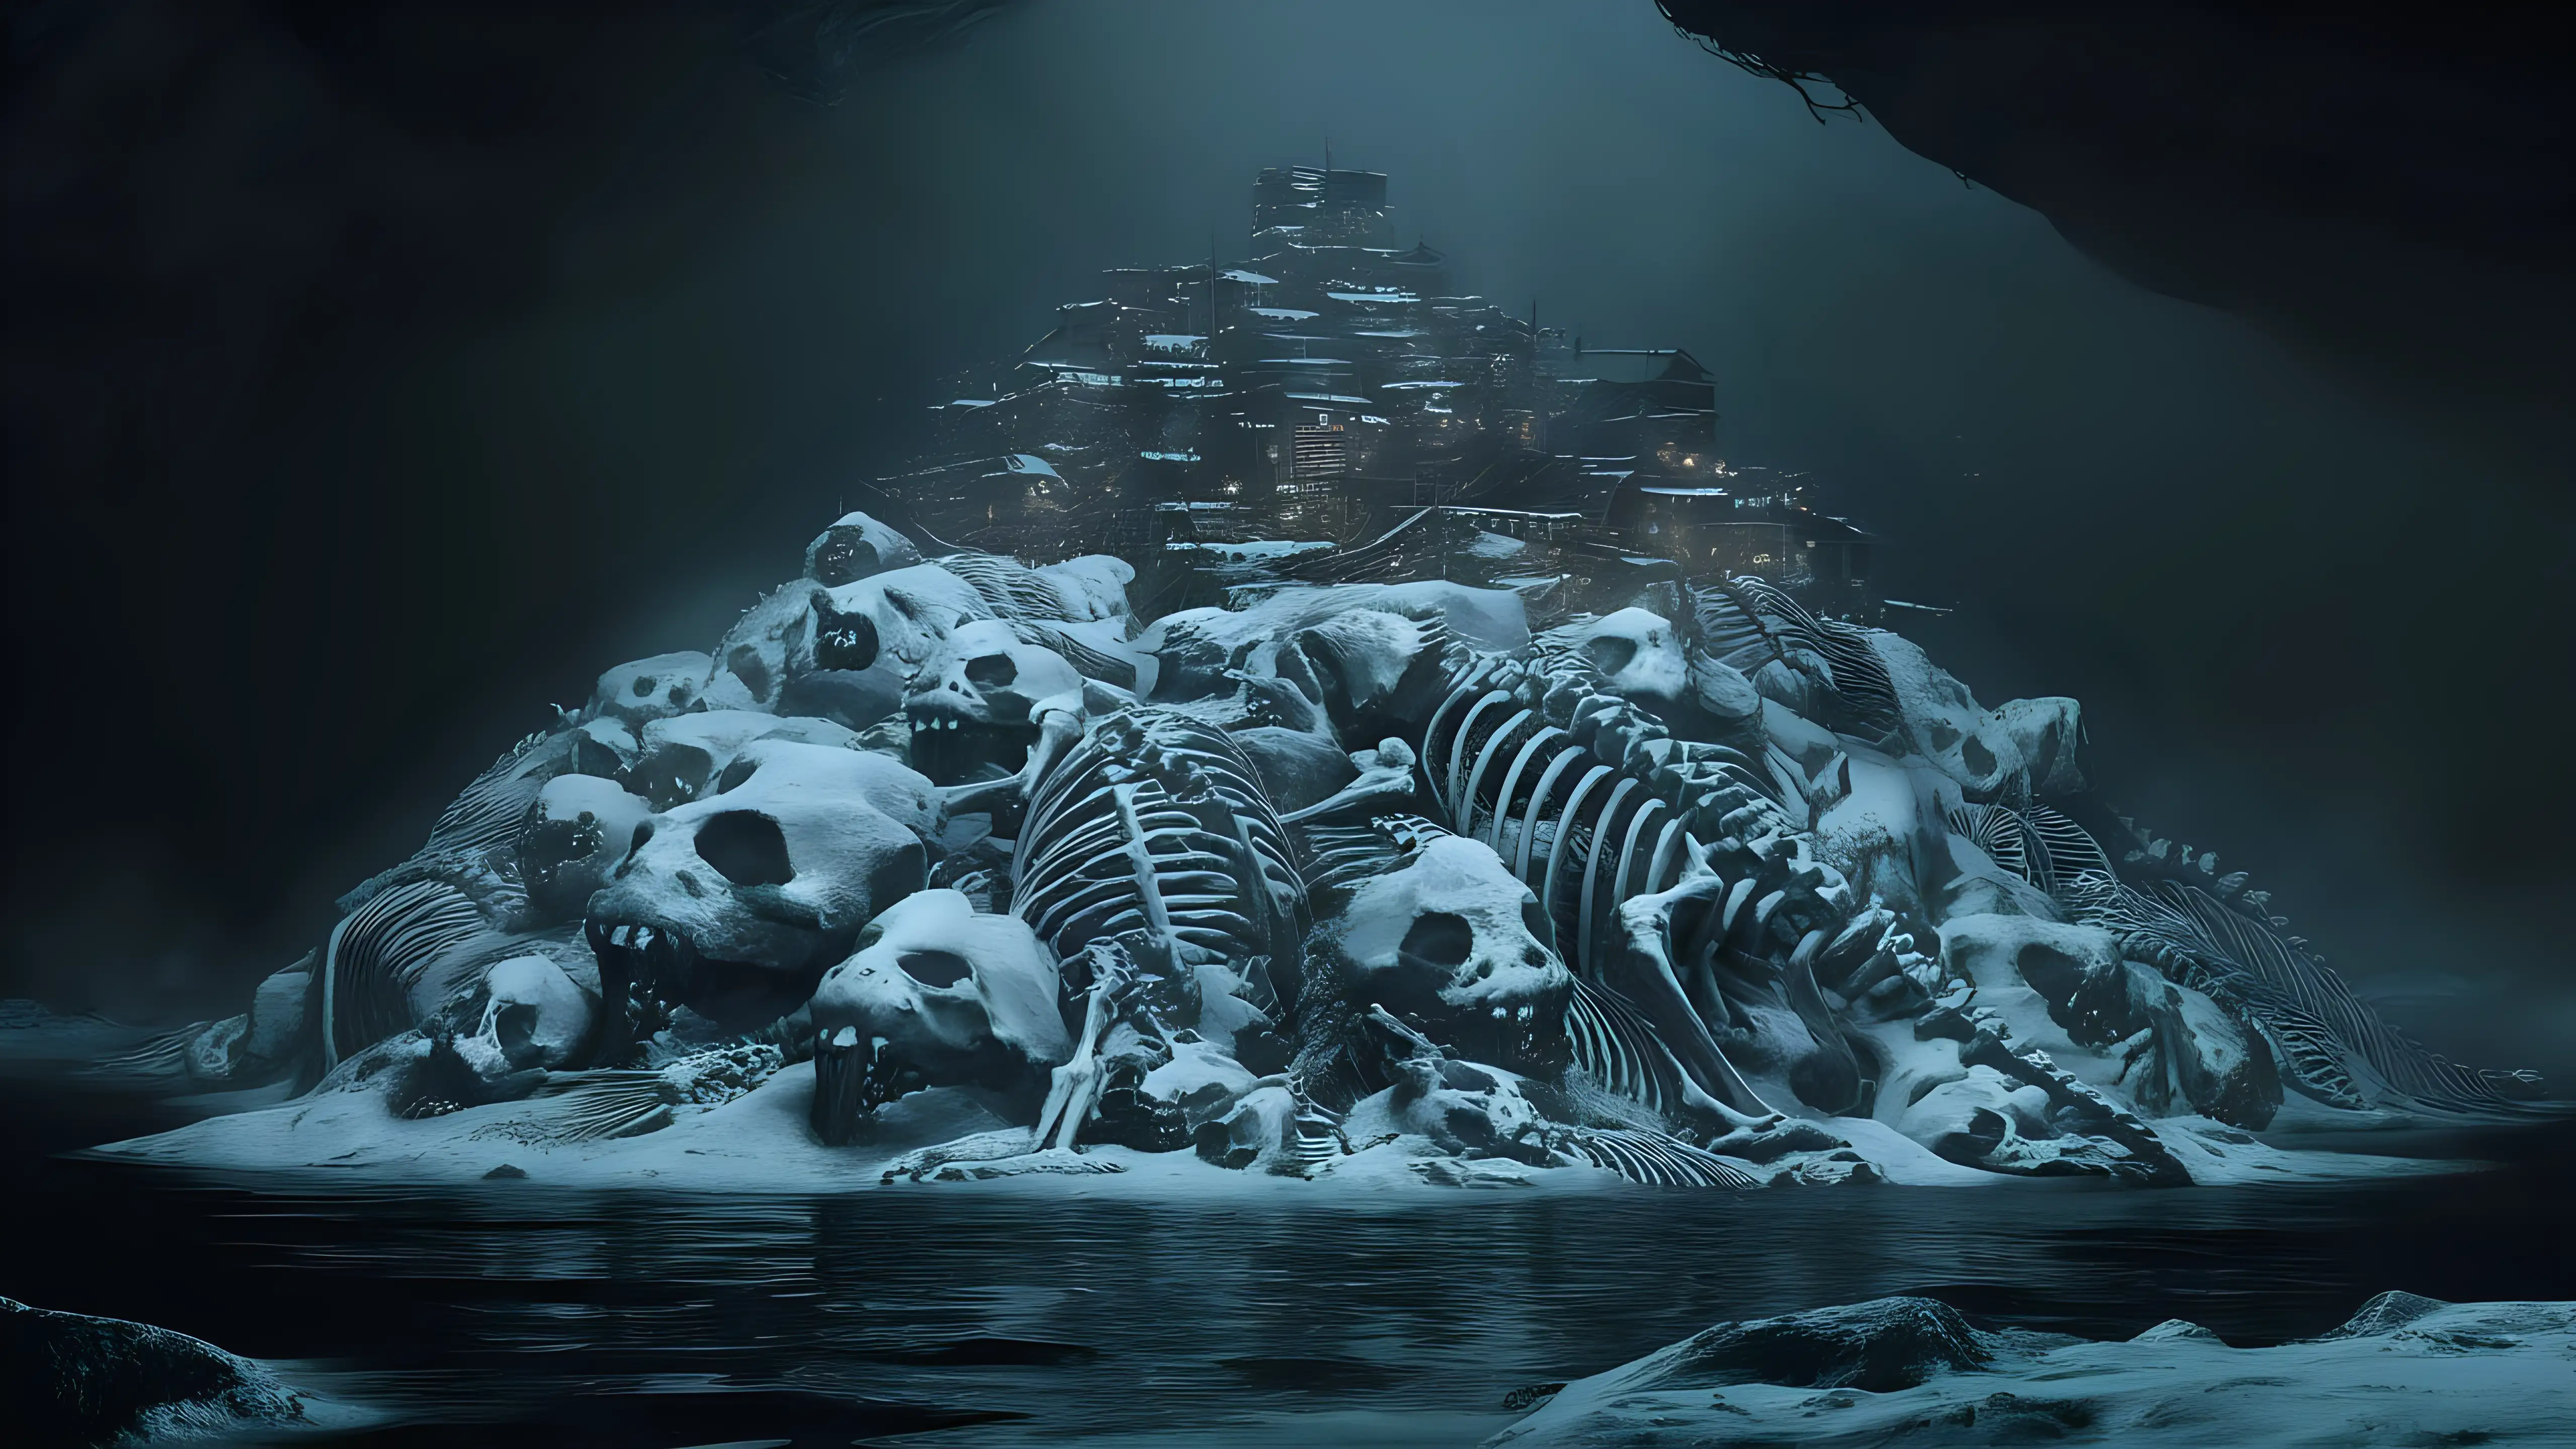 Ramshackle City on SnowCovered Giant Skeletons in Cavernous Depths